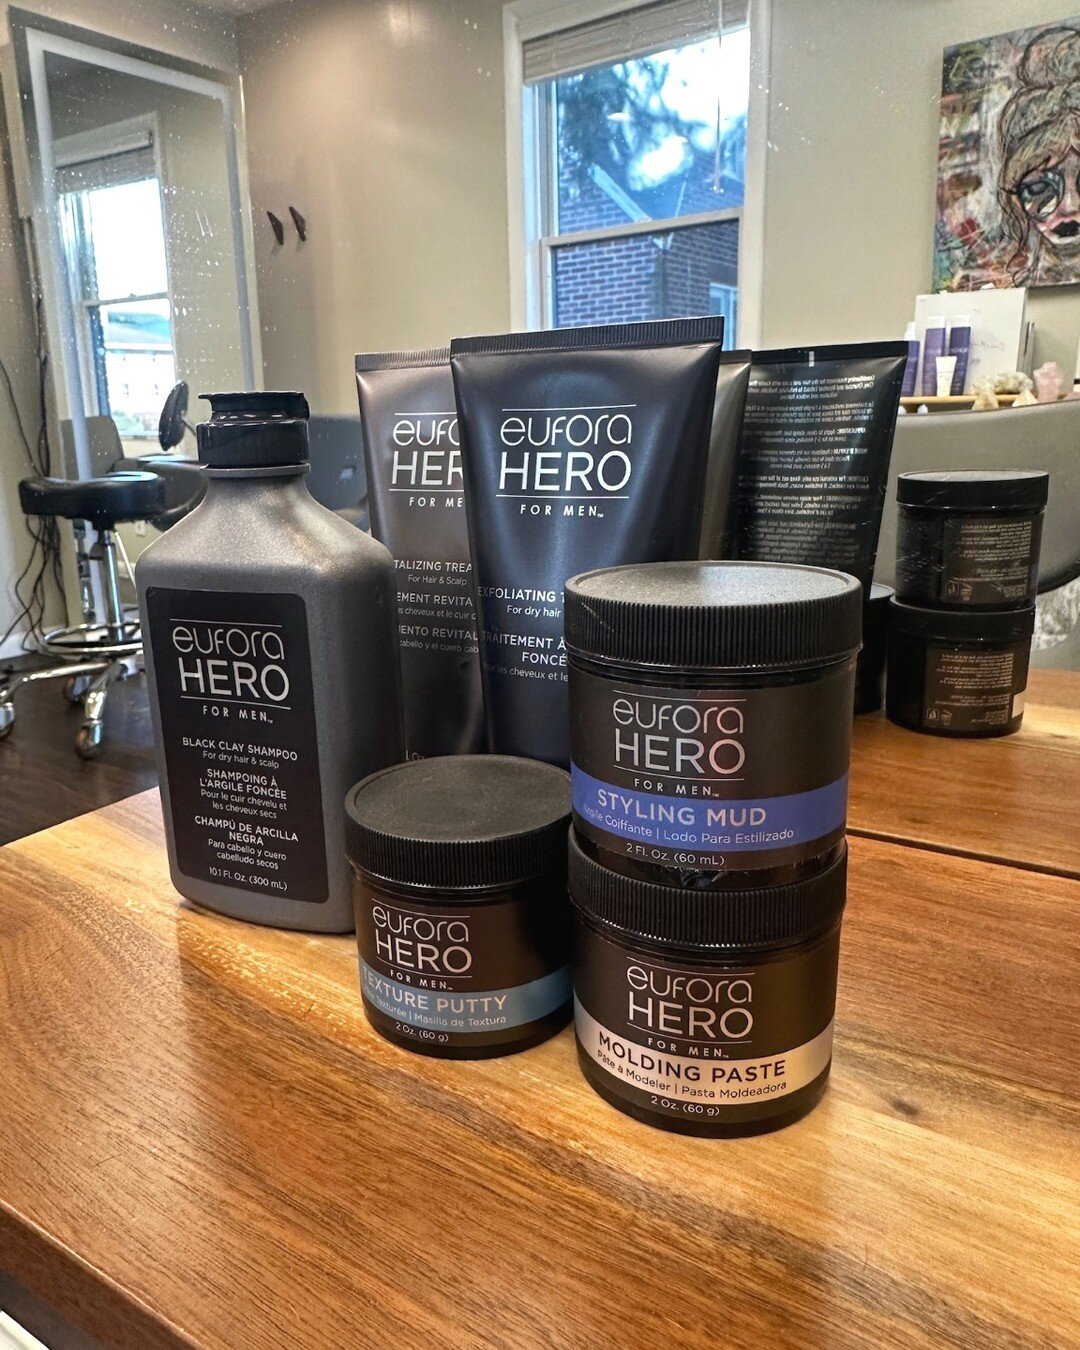 Deal of the day: 15% off all Hero products! These eco-friendly hair care products are a great gift for the guy in your life who deserves to level up his self-care routine!

The Eufora HERO for Men&trade; hair care formulations are developed with the 